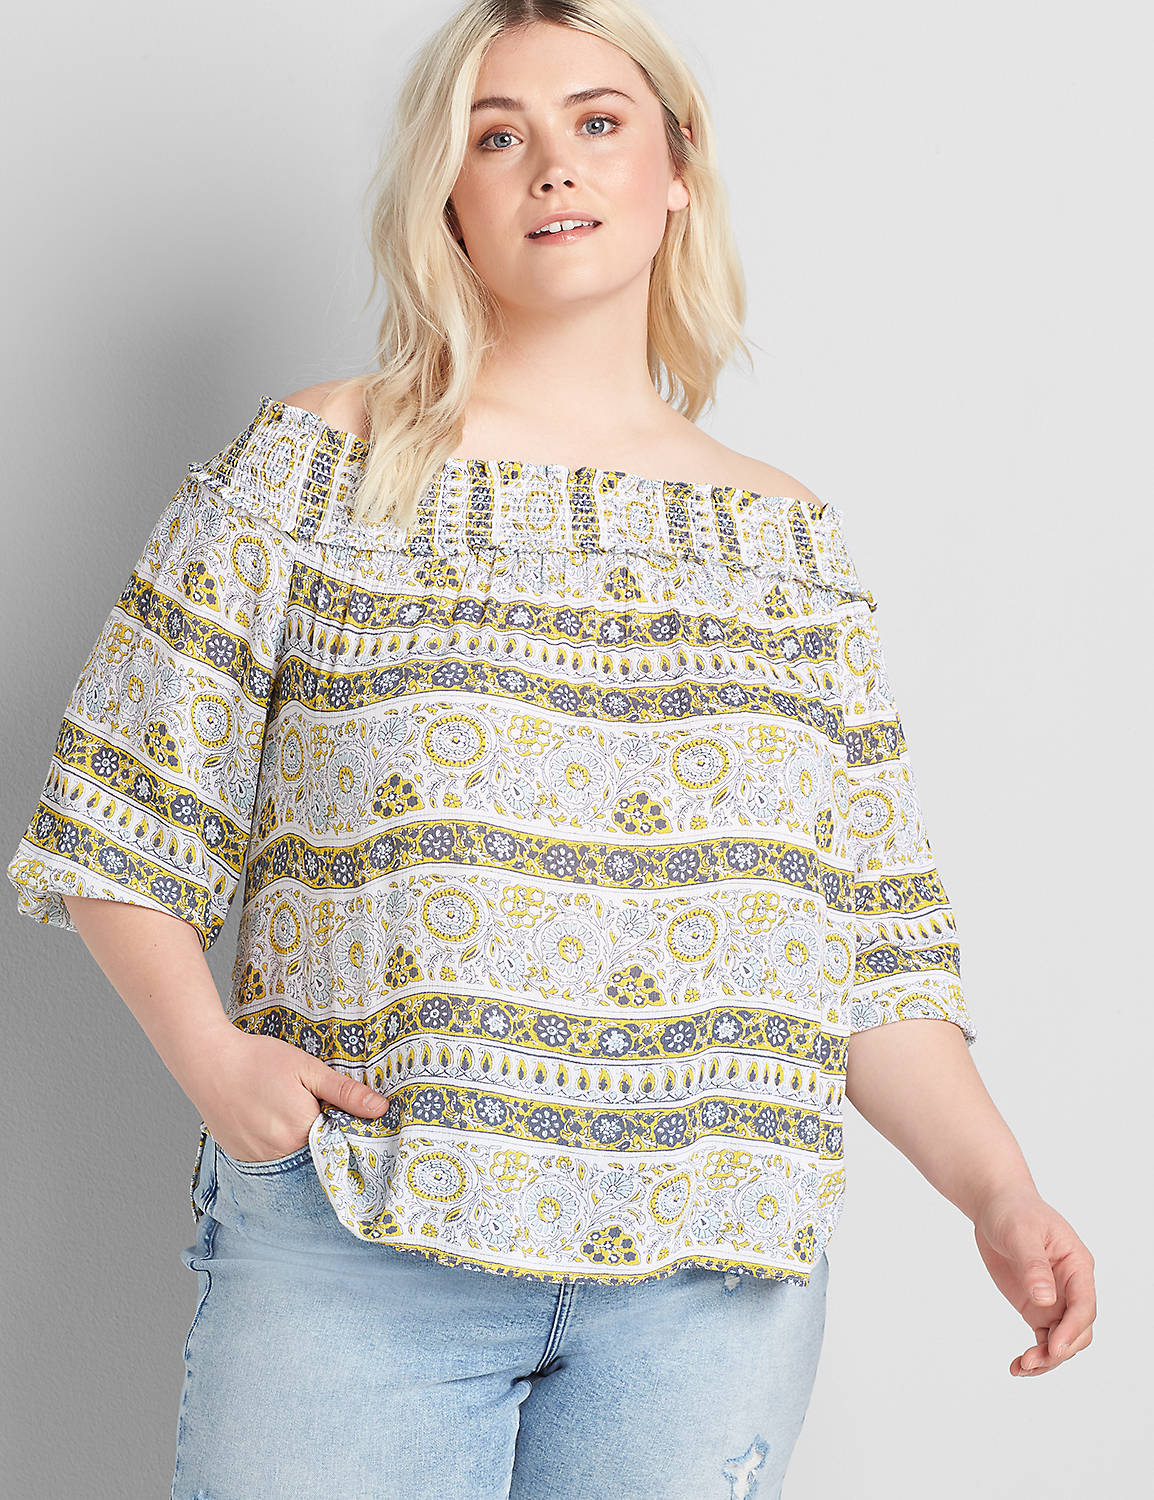 3/4 Sleeve Off-the-Shoulder Top Product Image 1